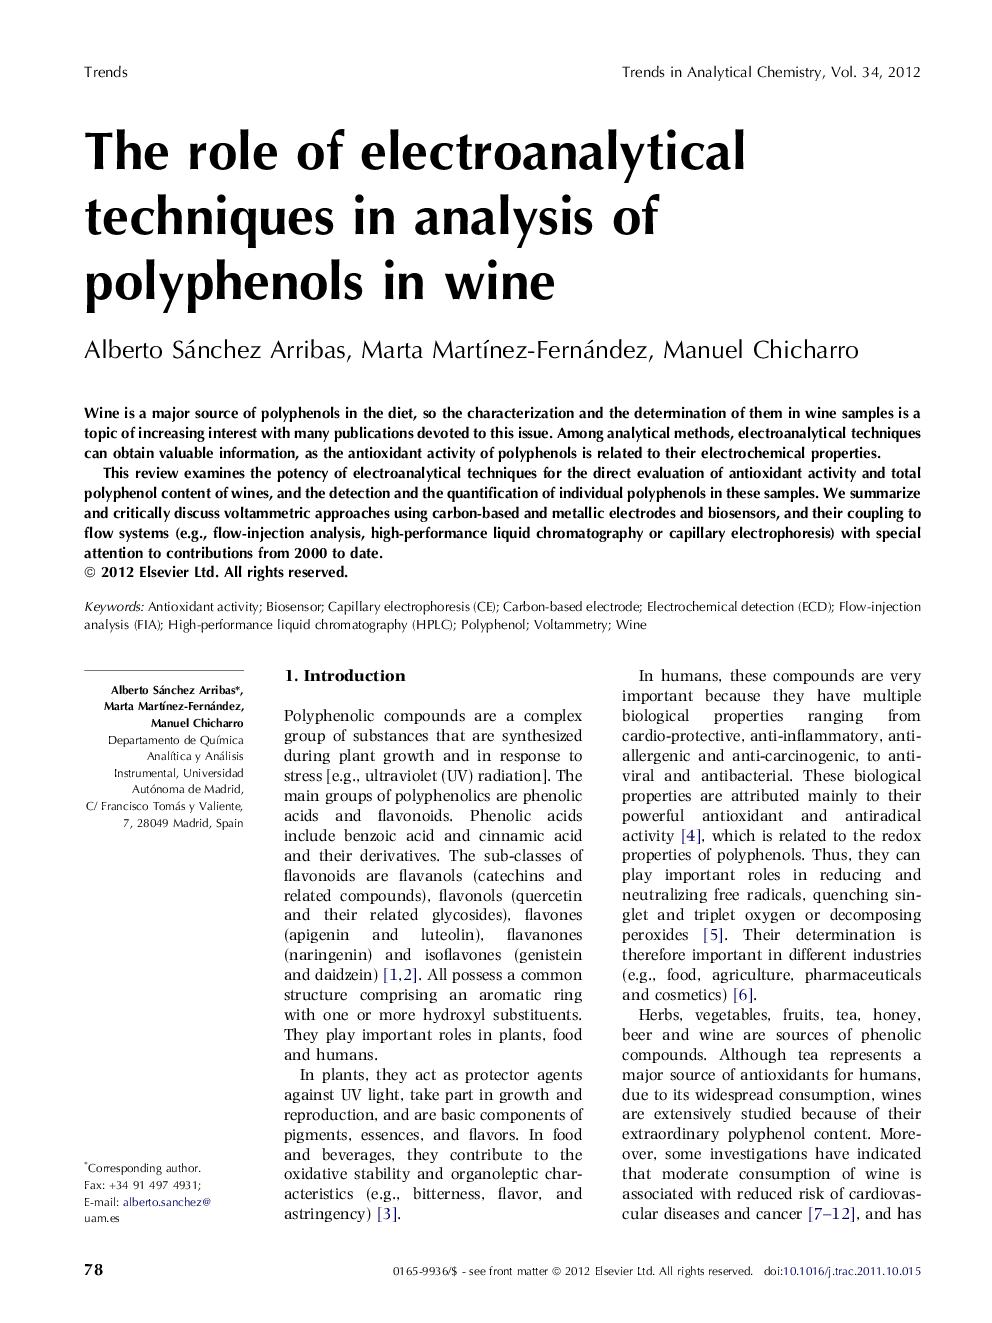 The role of electroanalytical techniques in analysis of polyphenols in wine